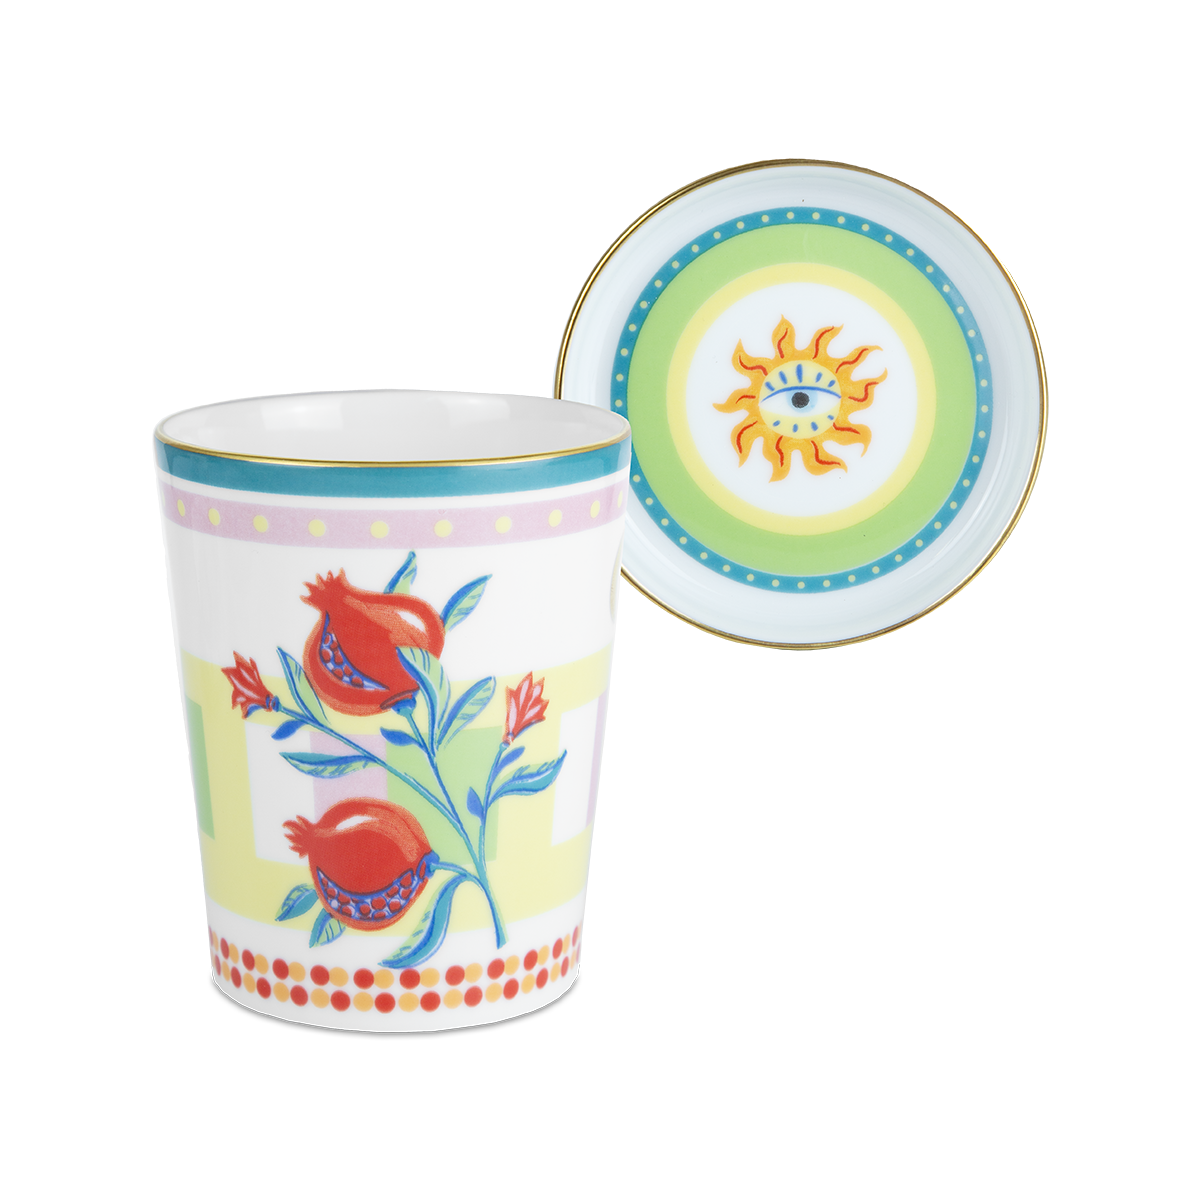 Porcelain glass with saucer/lid - Mamma Mia